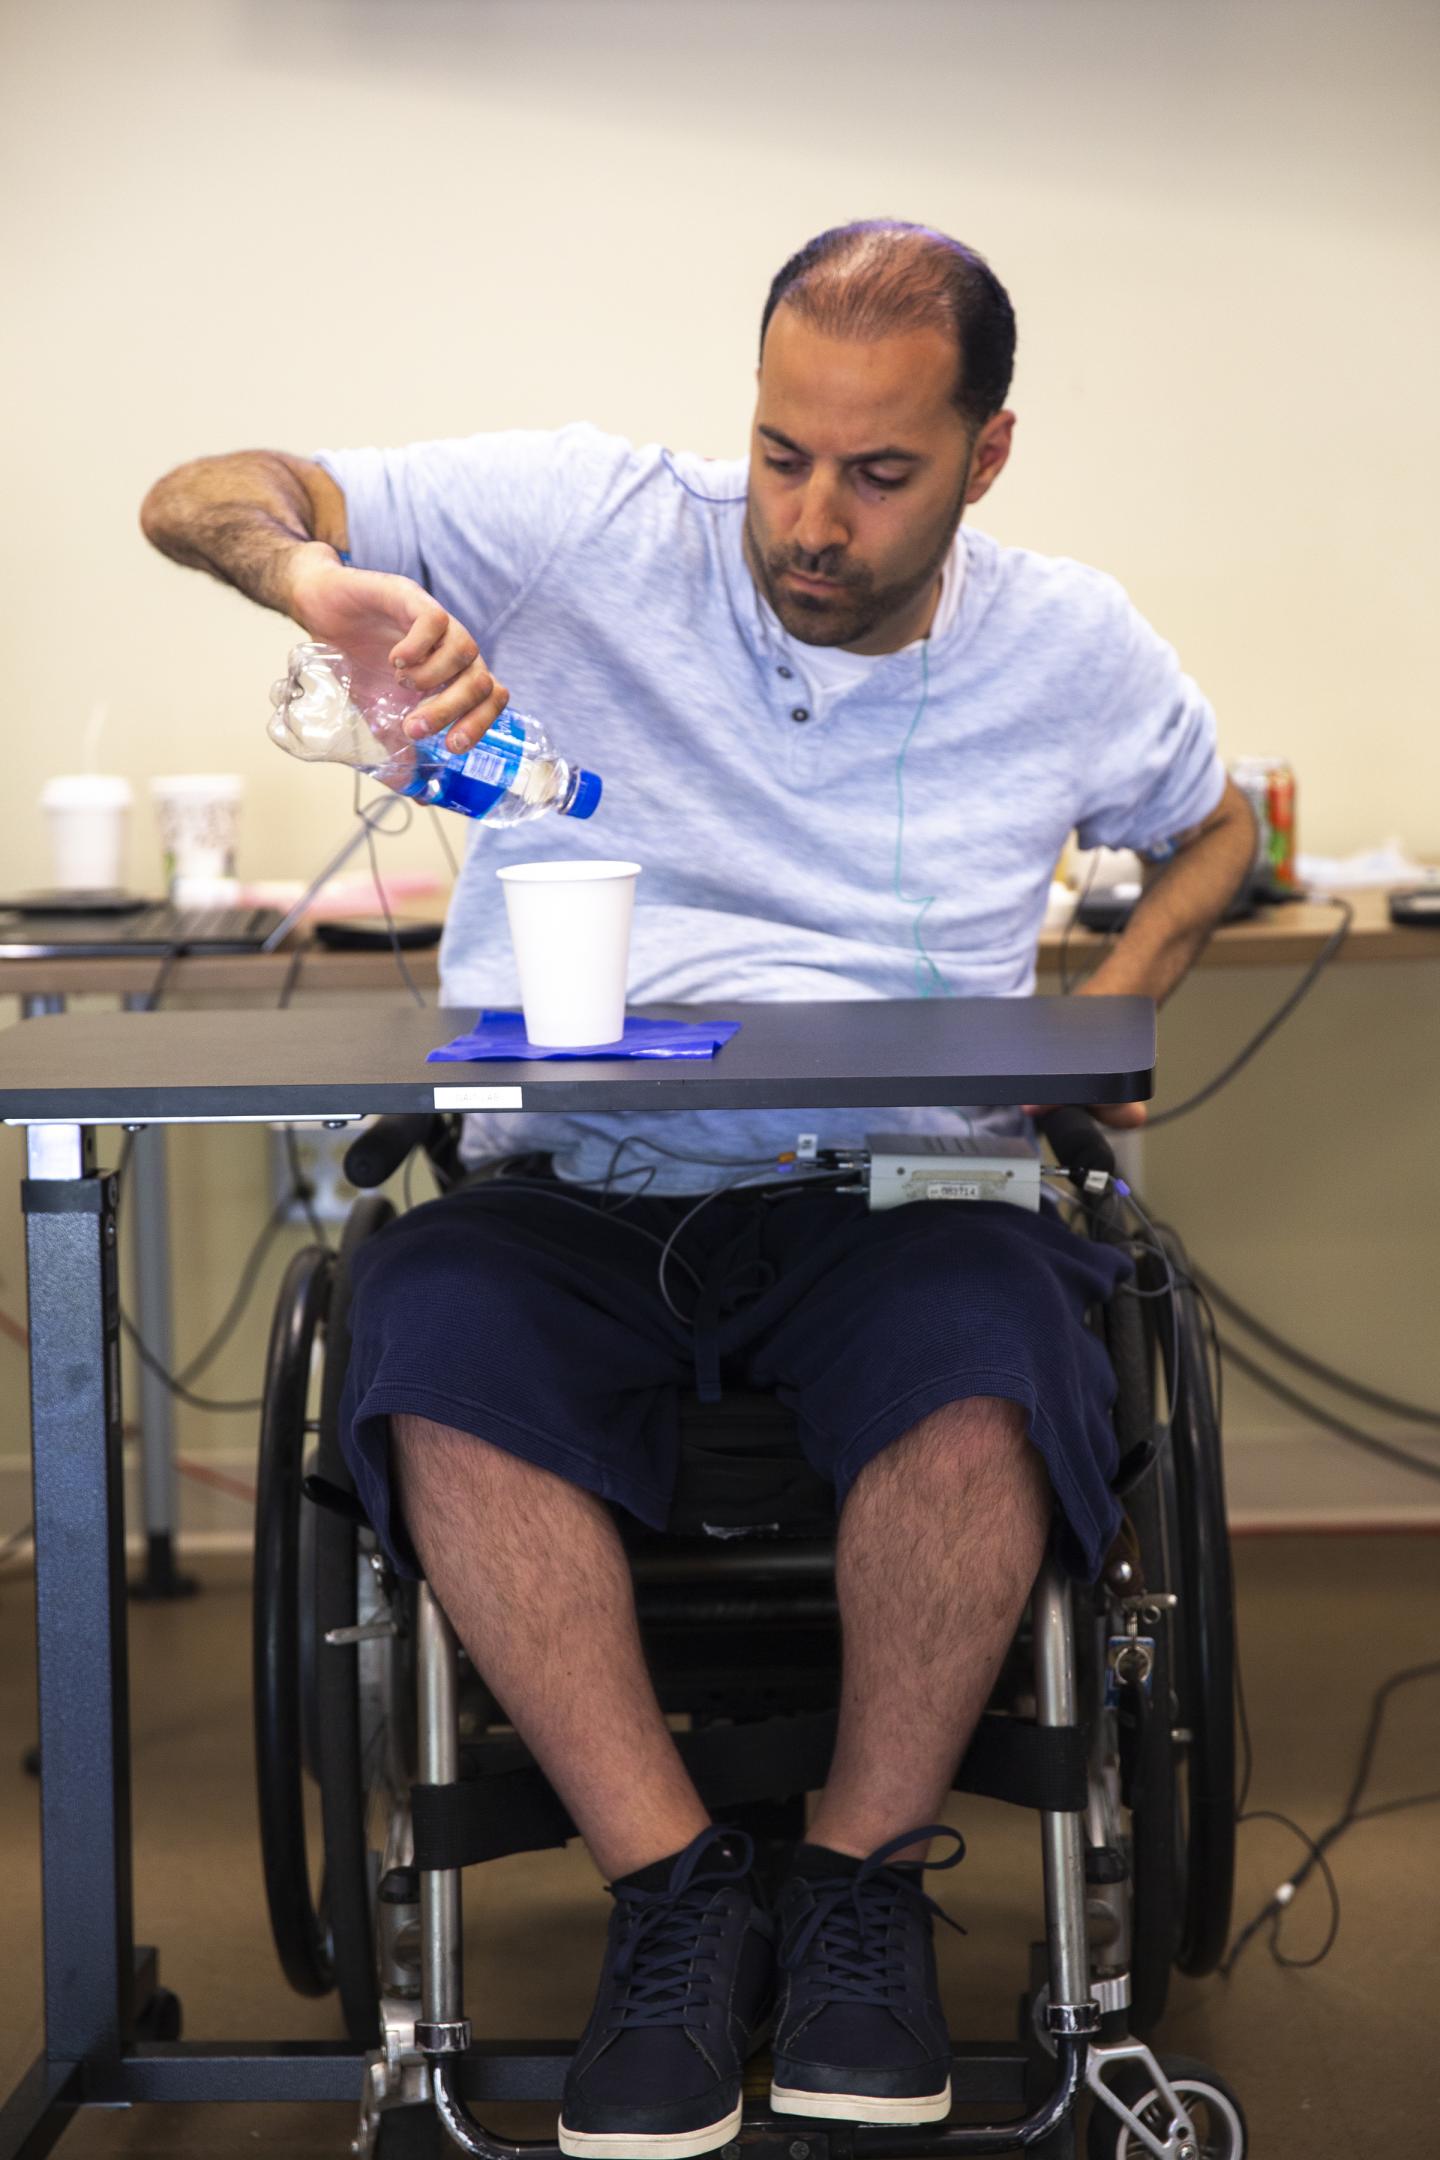 Demonstration of spinal cord transcutaneous stimulation combined with hand training